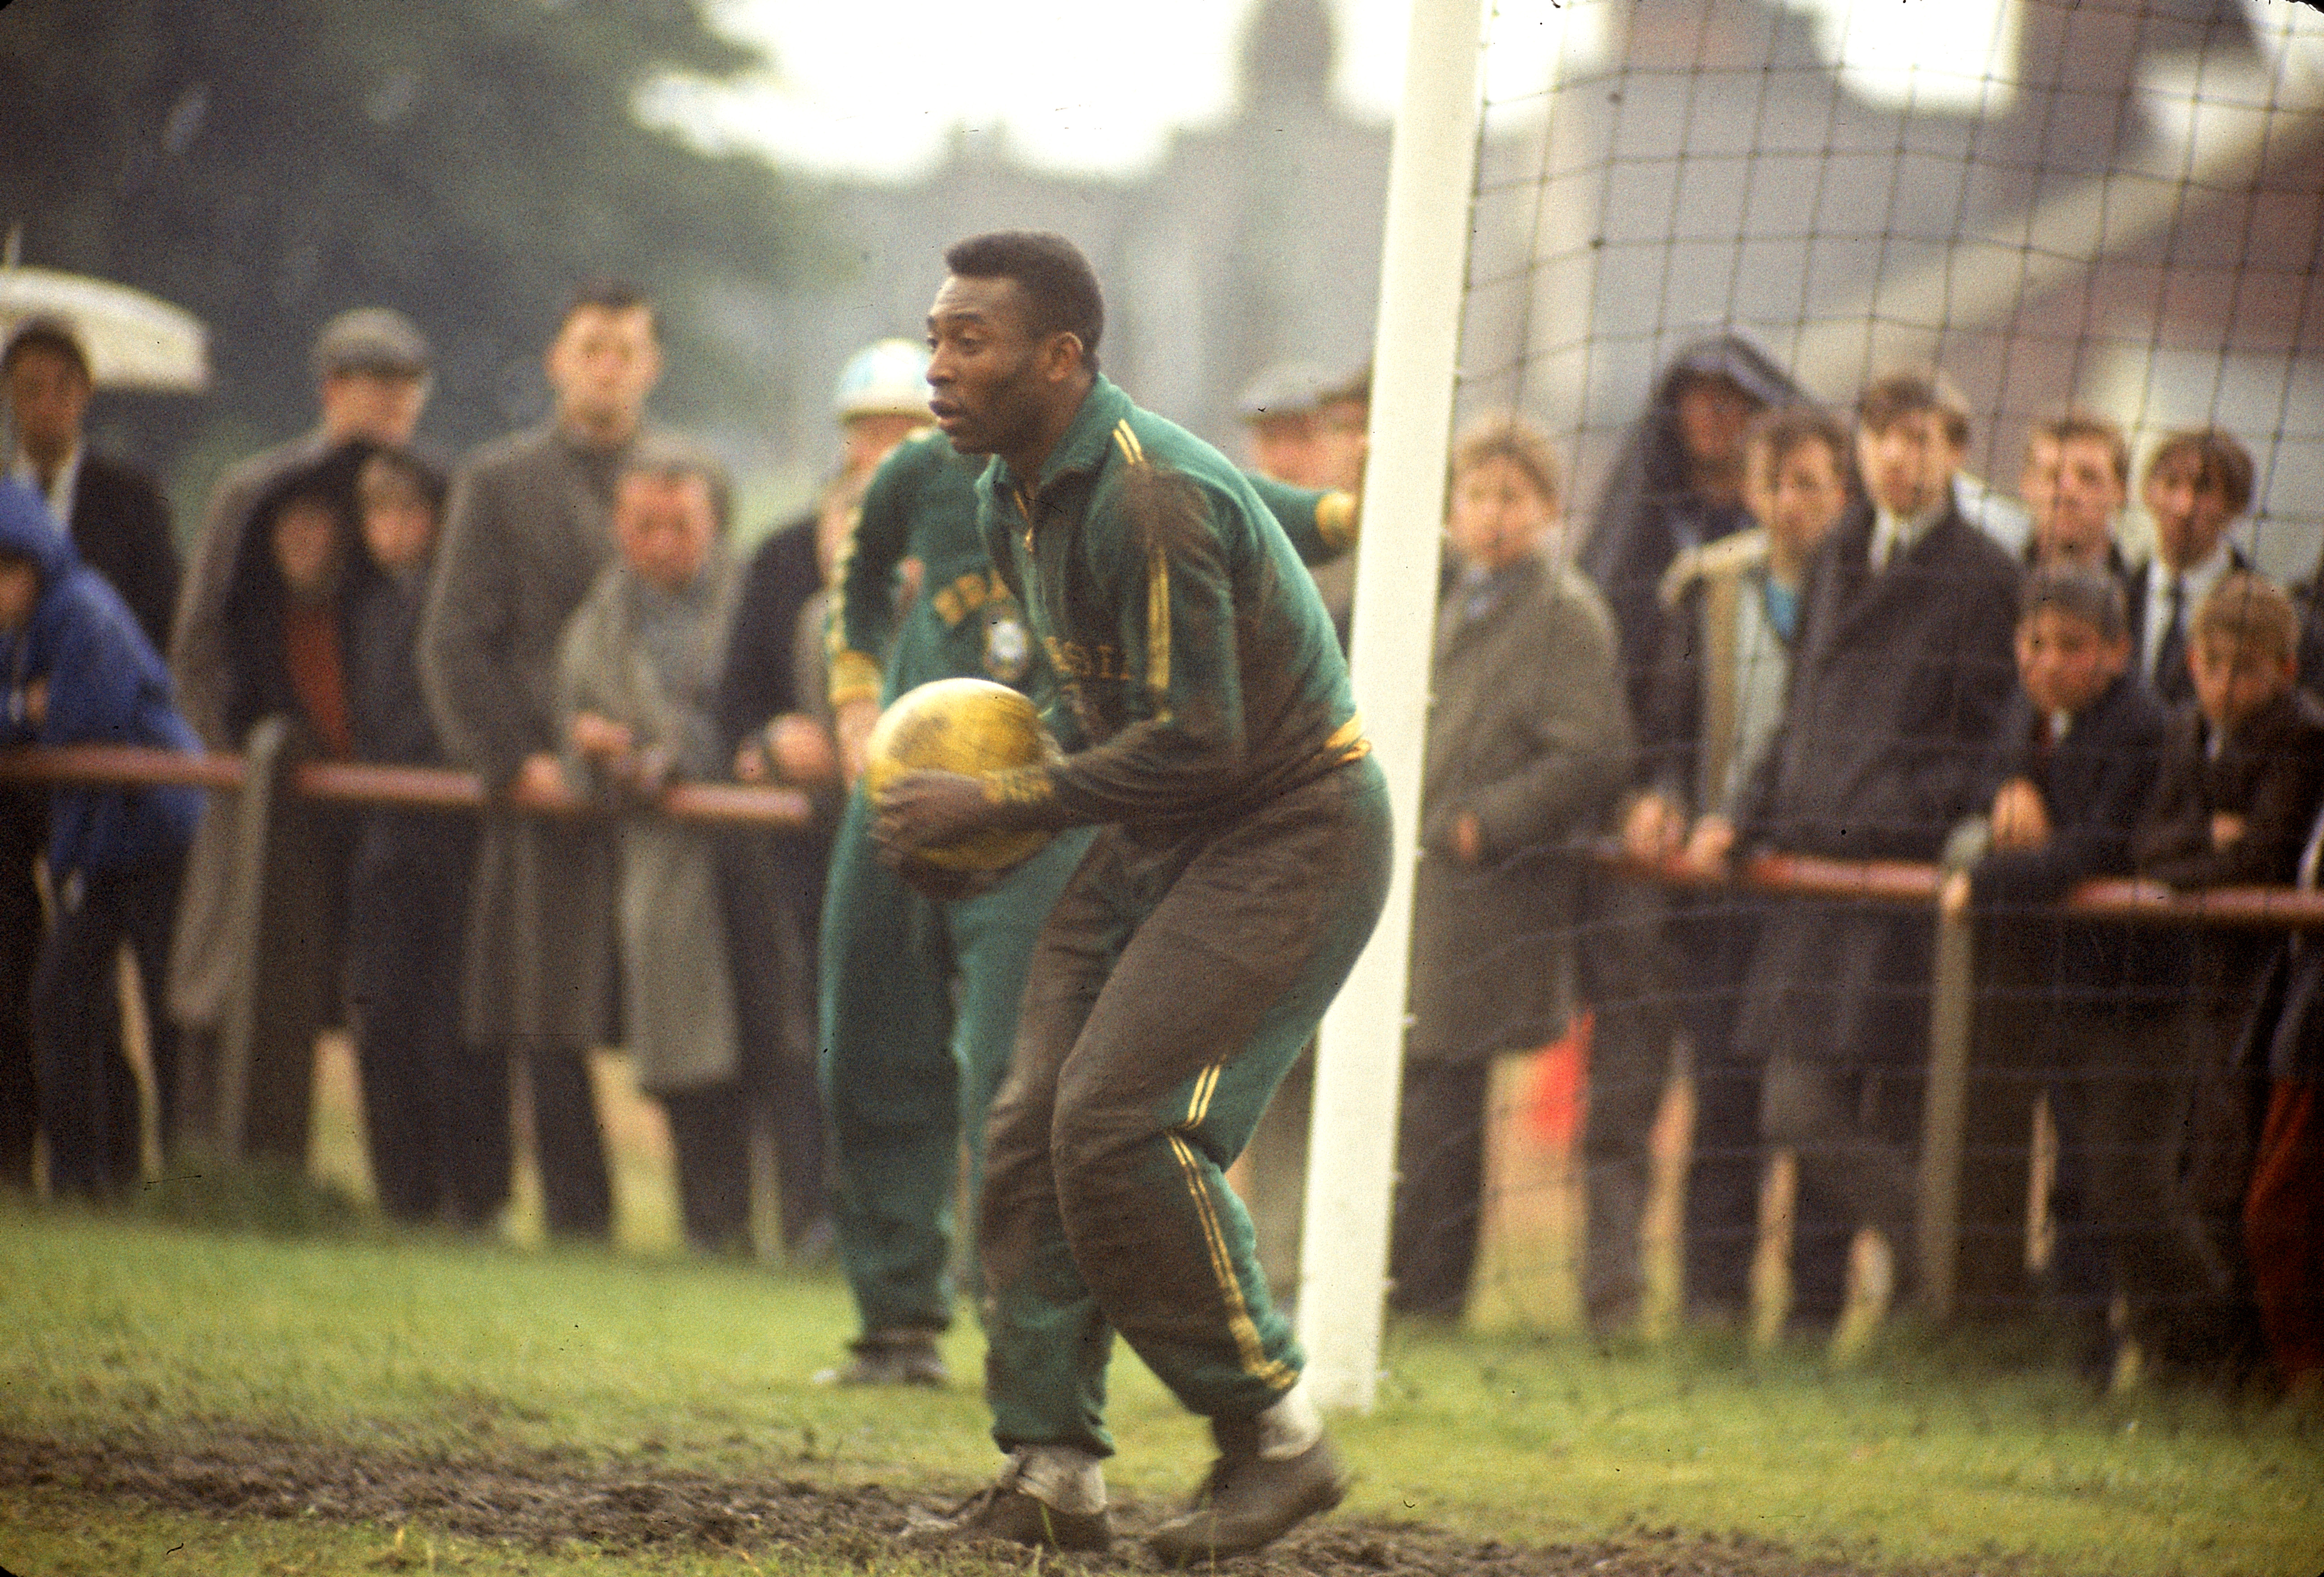 Pelé in action during a practice